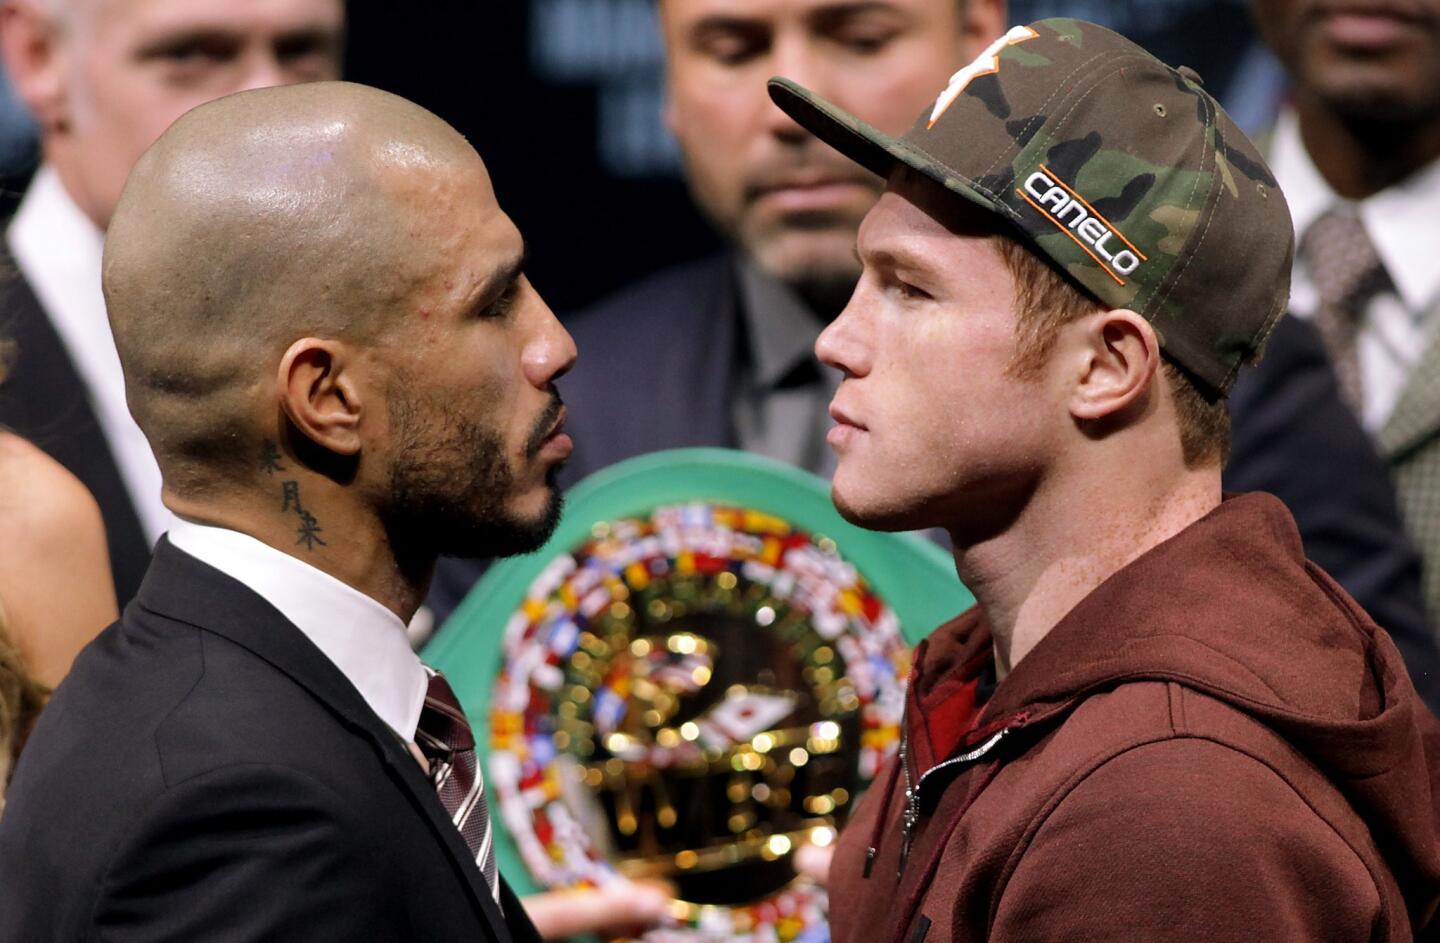 Former WBC Middleweight World Champion Miguel Cotto (L), from Puerto Rico and two time world champion, Saul 'Canelo' Alvarez from Guadalajara, Mexico face-off during a press conference in Las Vegas, Nevada on November 18, 2015. Cotto was stripped of his World Boxing Council middleweight world title on Tuesday, days before his anticipated bout against Mexican Saul Alvarez in Las Vegas on Saturday. Amid reports that Cotto declined to pay the USD 300,000 sanctioning fee for a title fight, the WBC said in a statement only that the Puerto Rican and his camp failed to comply with WBC regulations. AFP PHOTO/ John GurzinskiJOHN GURZINSKI/AFP/Getty Images ** OUTS - ELSENT, FPG, CM - OUTS * NM, PH, VA if sourced by CT, LA or MoD **